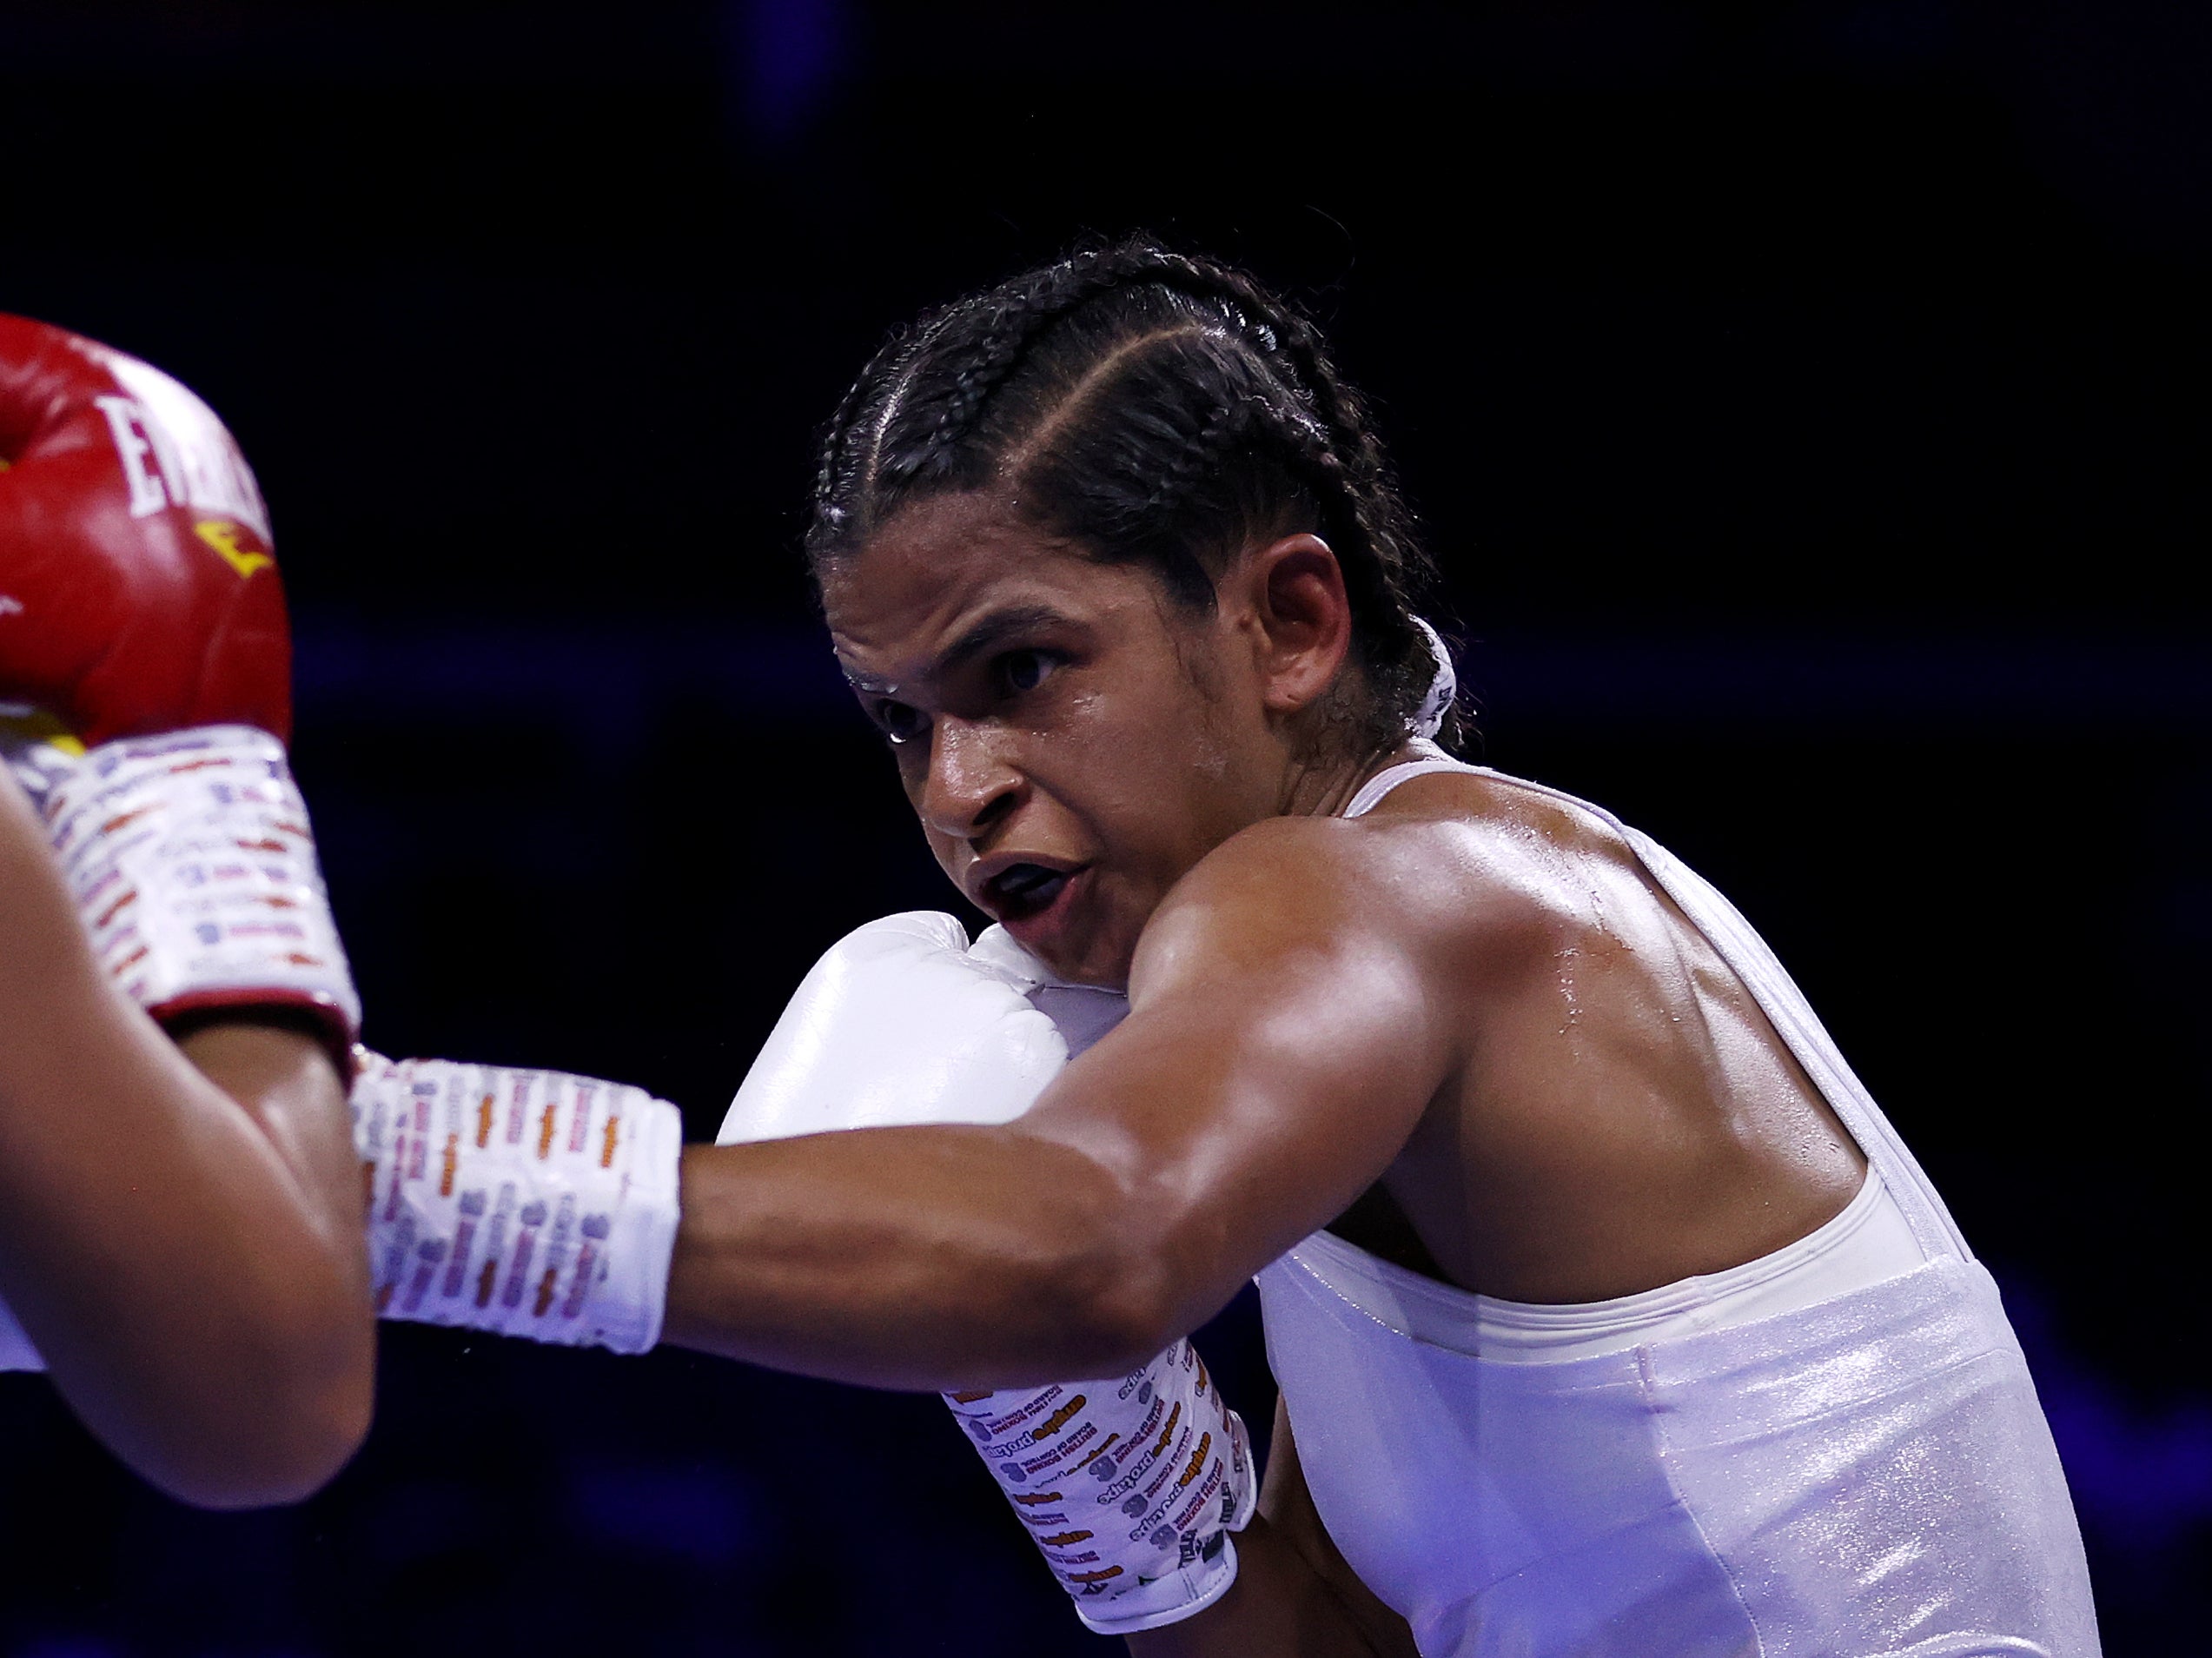 Saudi Arabia to host its first professional womens boxing match on Joshua vs Usyk undercard The Independent